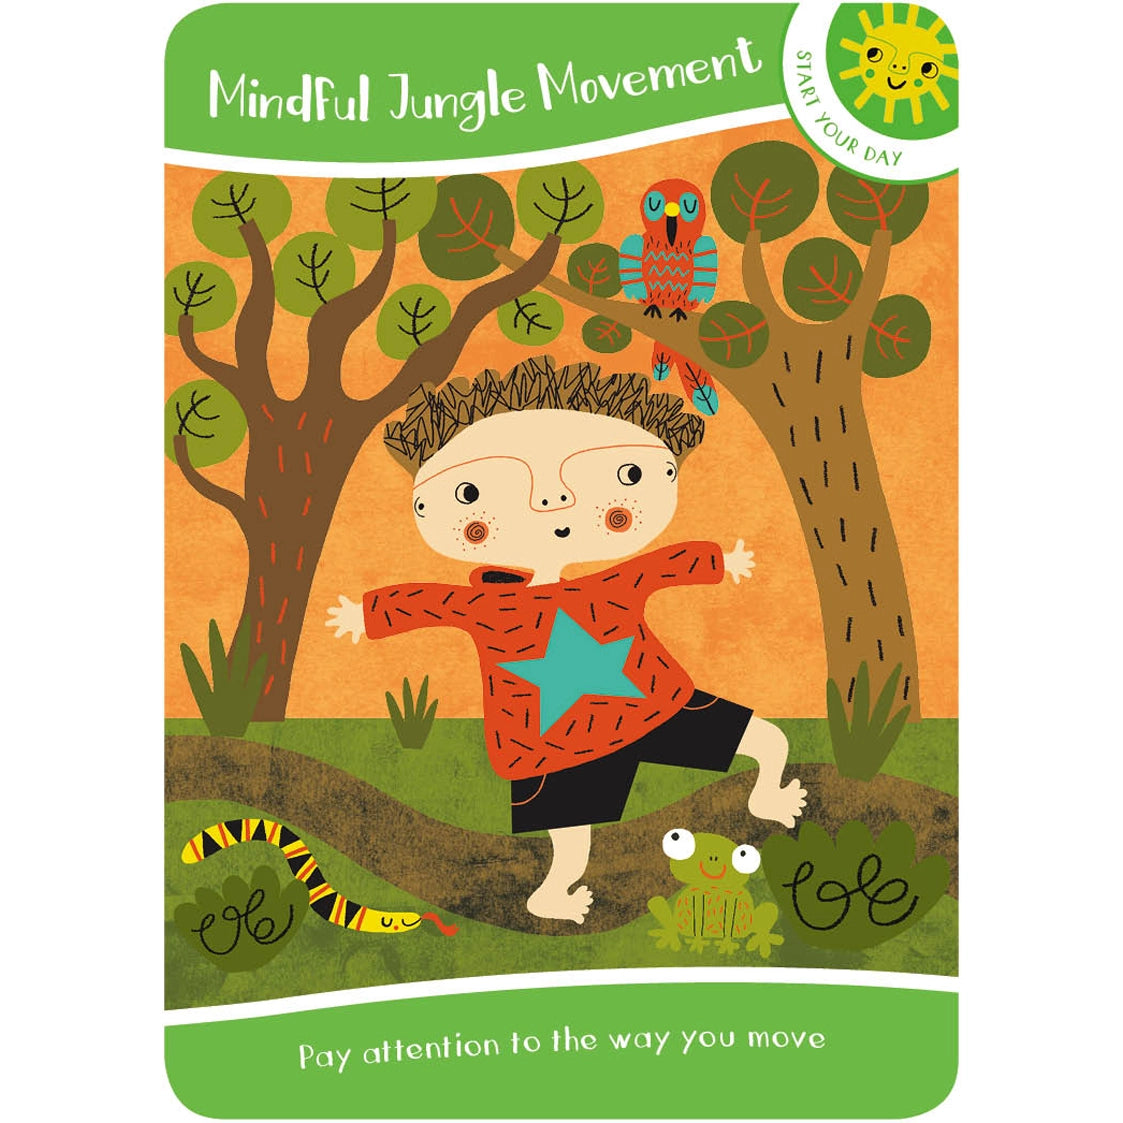 Mindful Kids - Children's Activity Cards by Barefoot Books. Mindfulness activities for children.